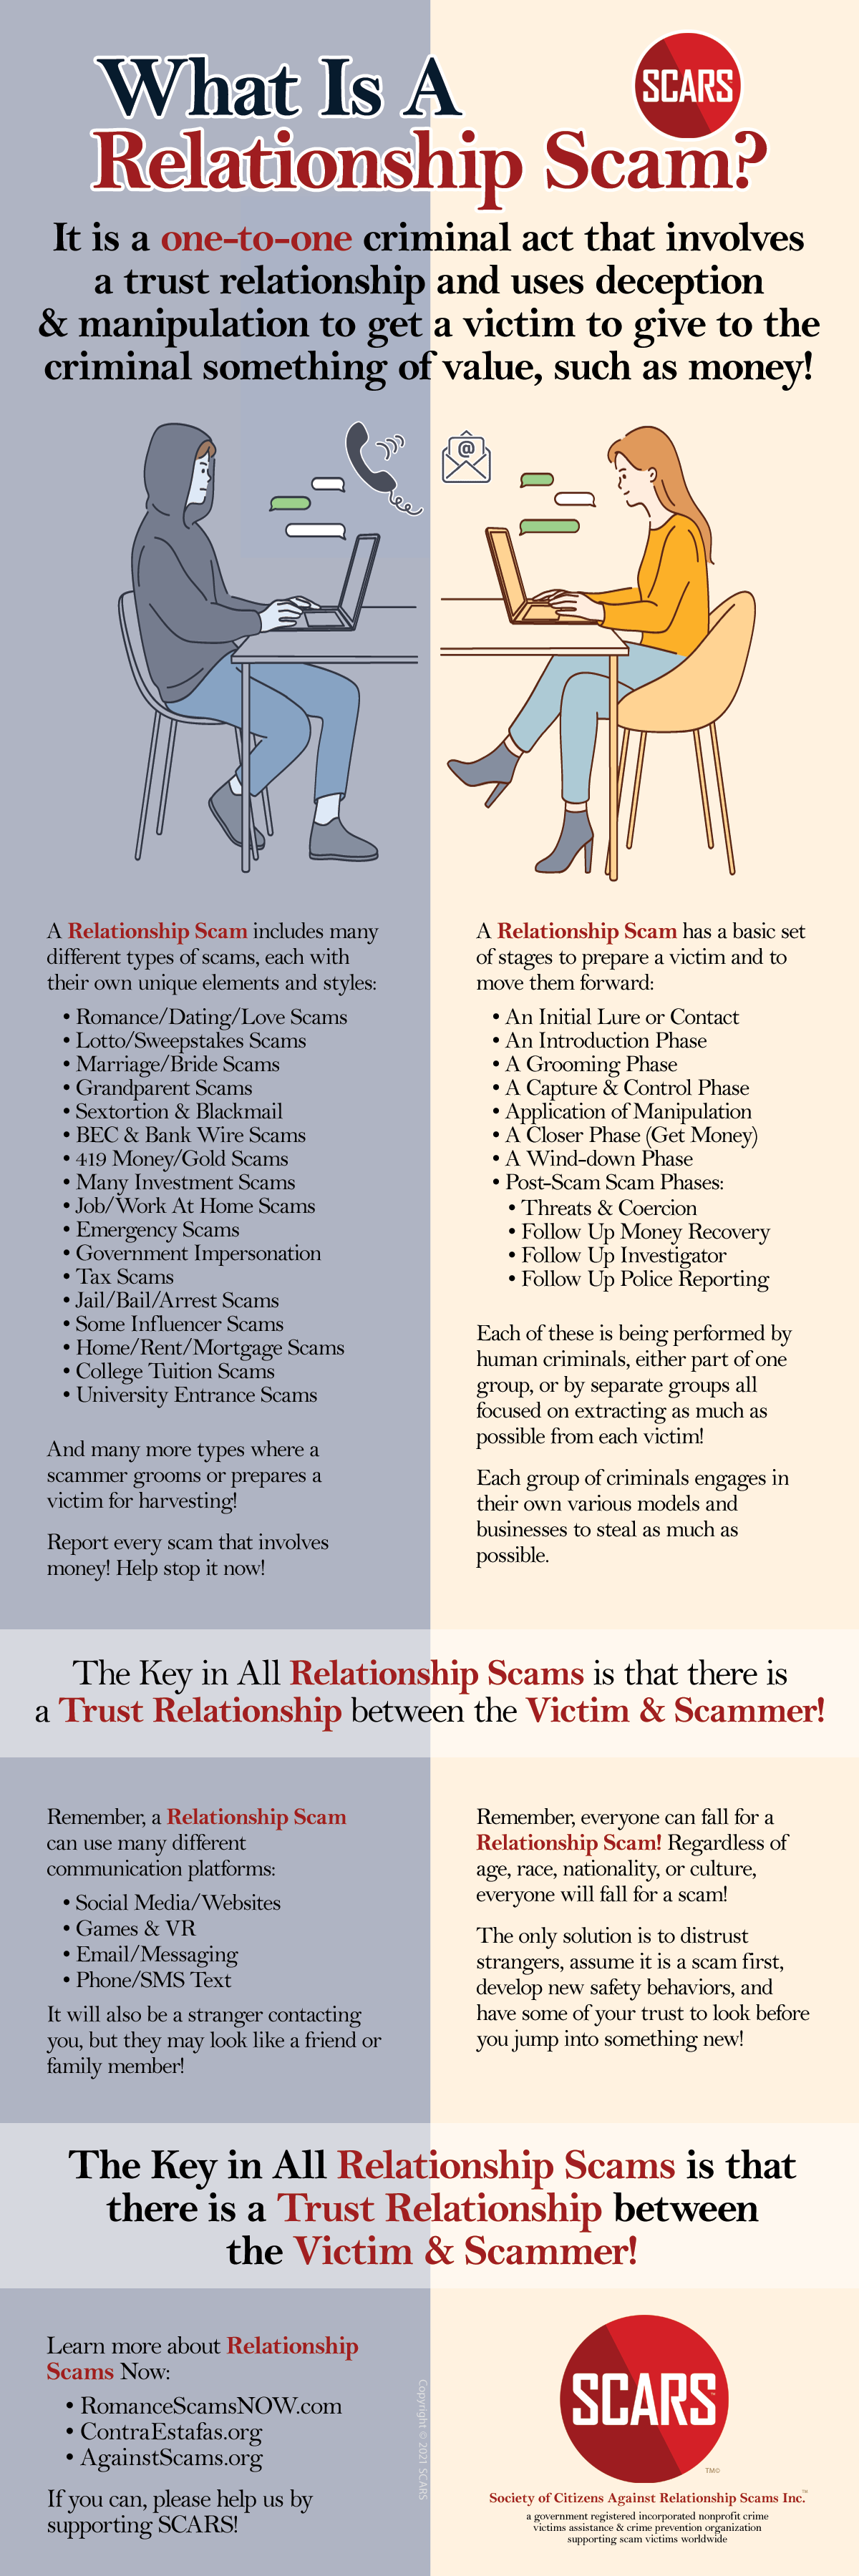 What is a Relationship Scam